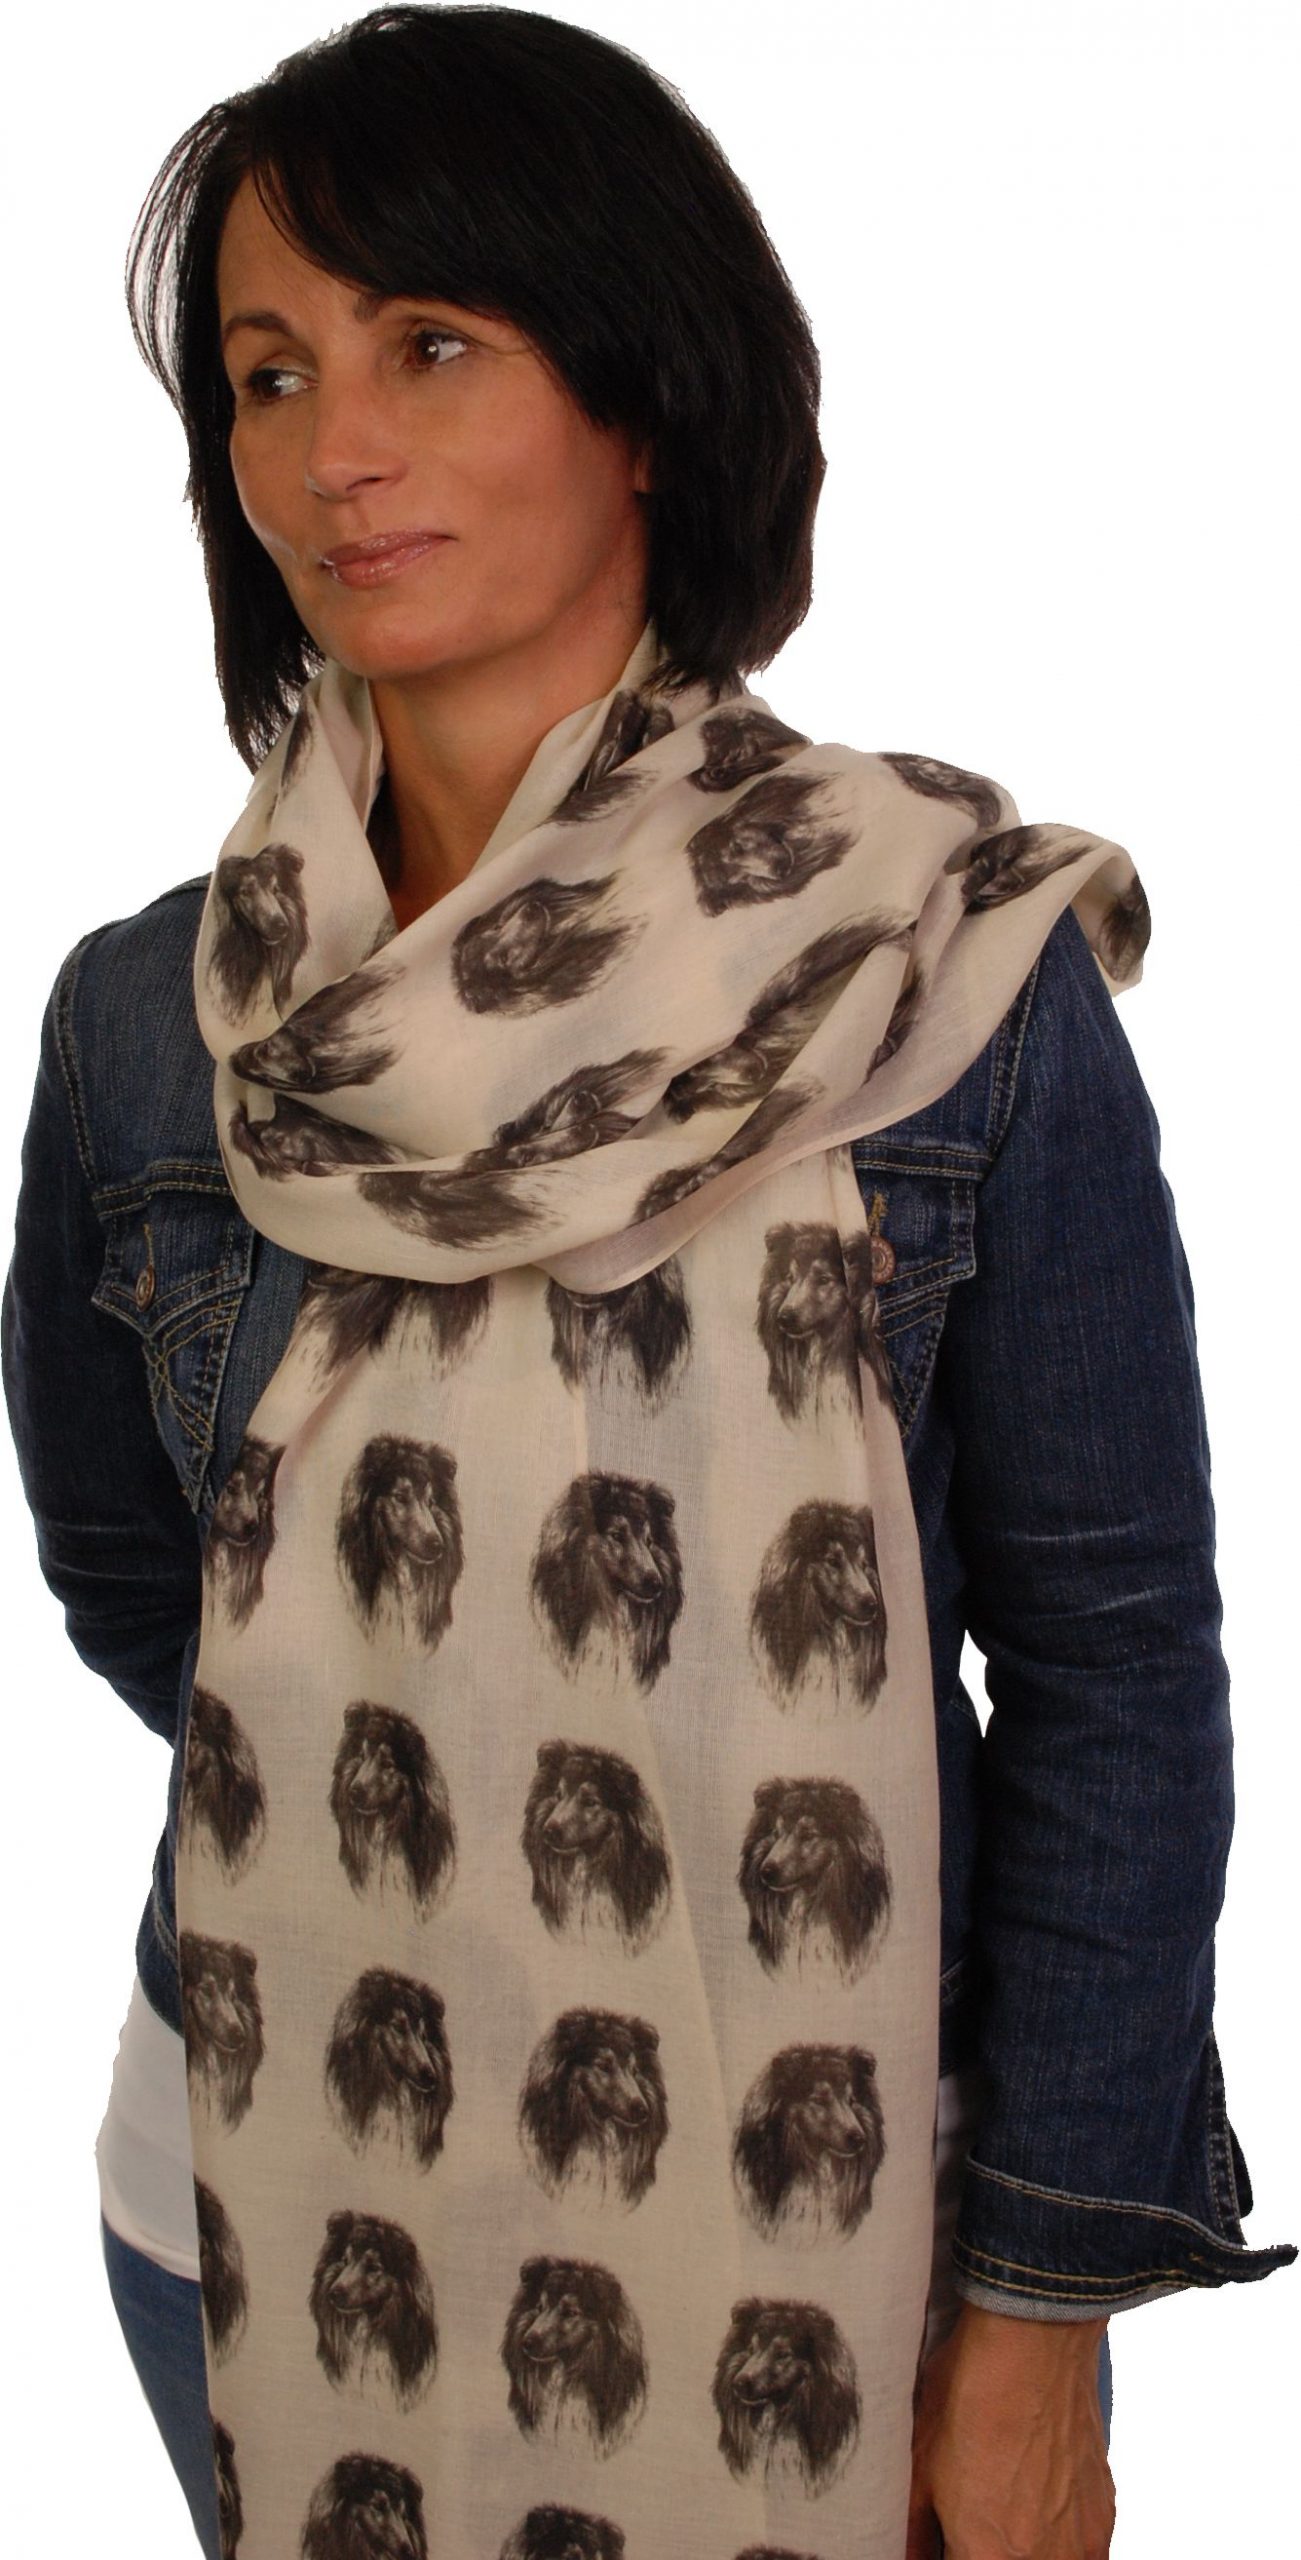 Mike Sibley Rough Collie licensed design ladies fashion scarf